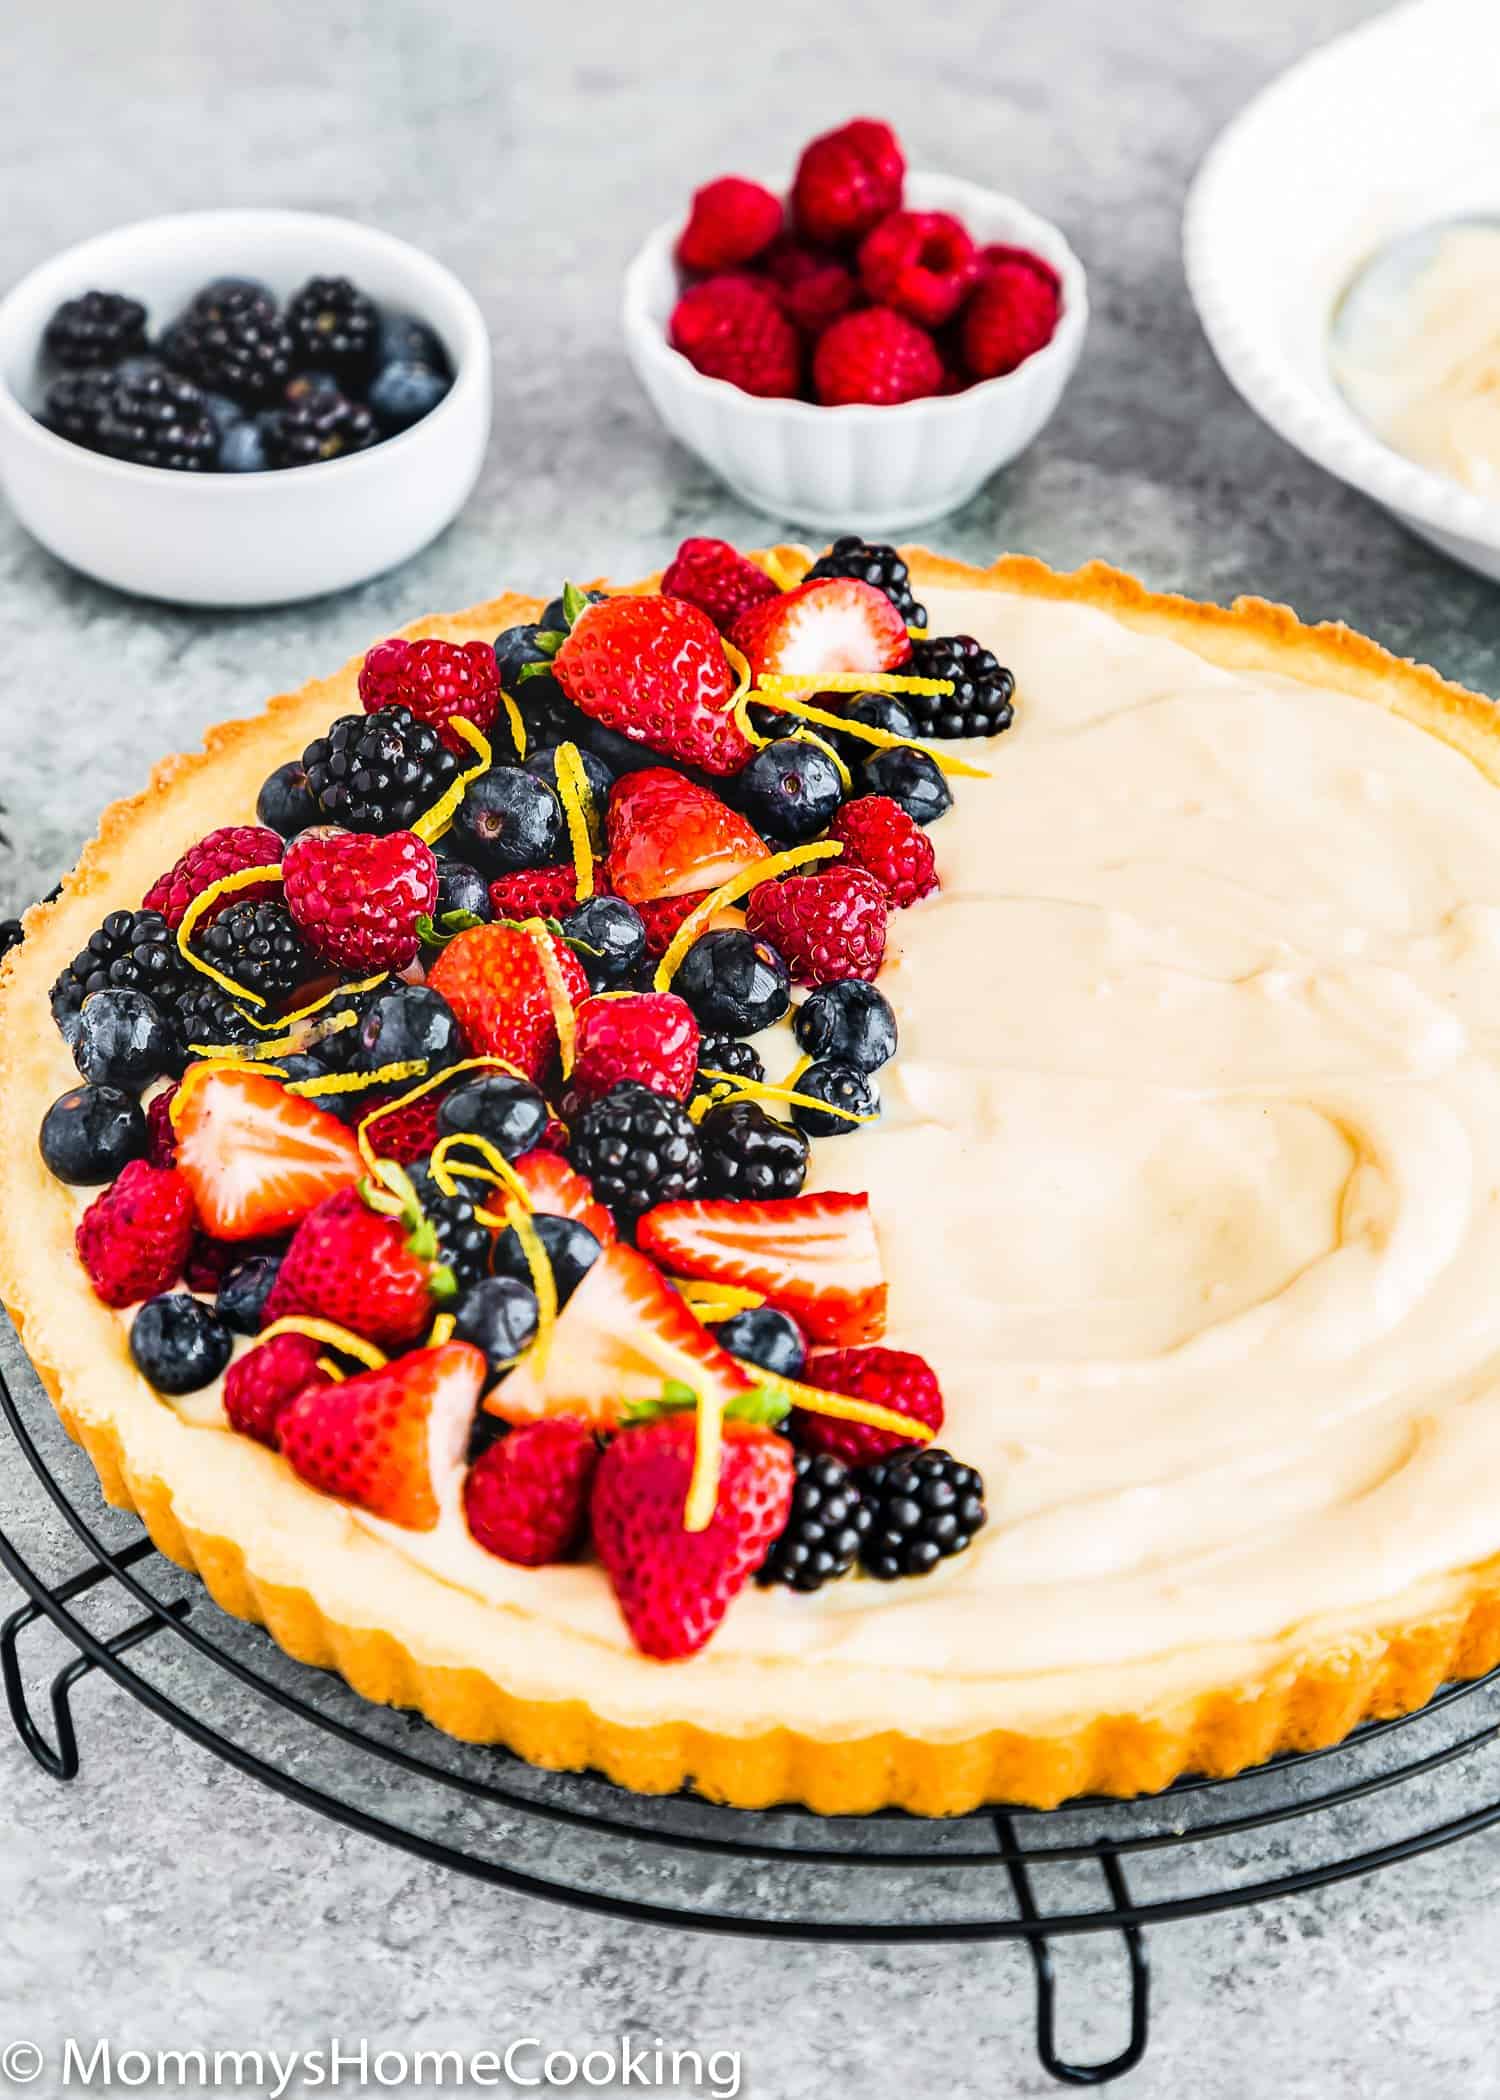 whole Eggless Fruit Tart filled with eggless pastry cream and fresh berries.